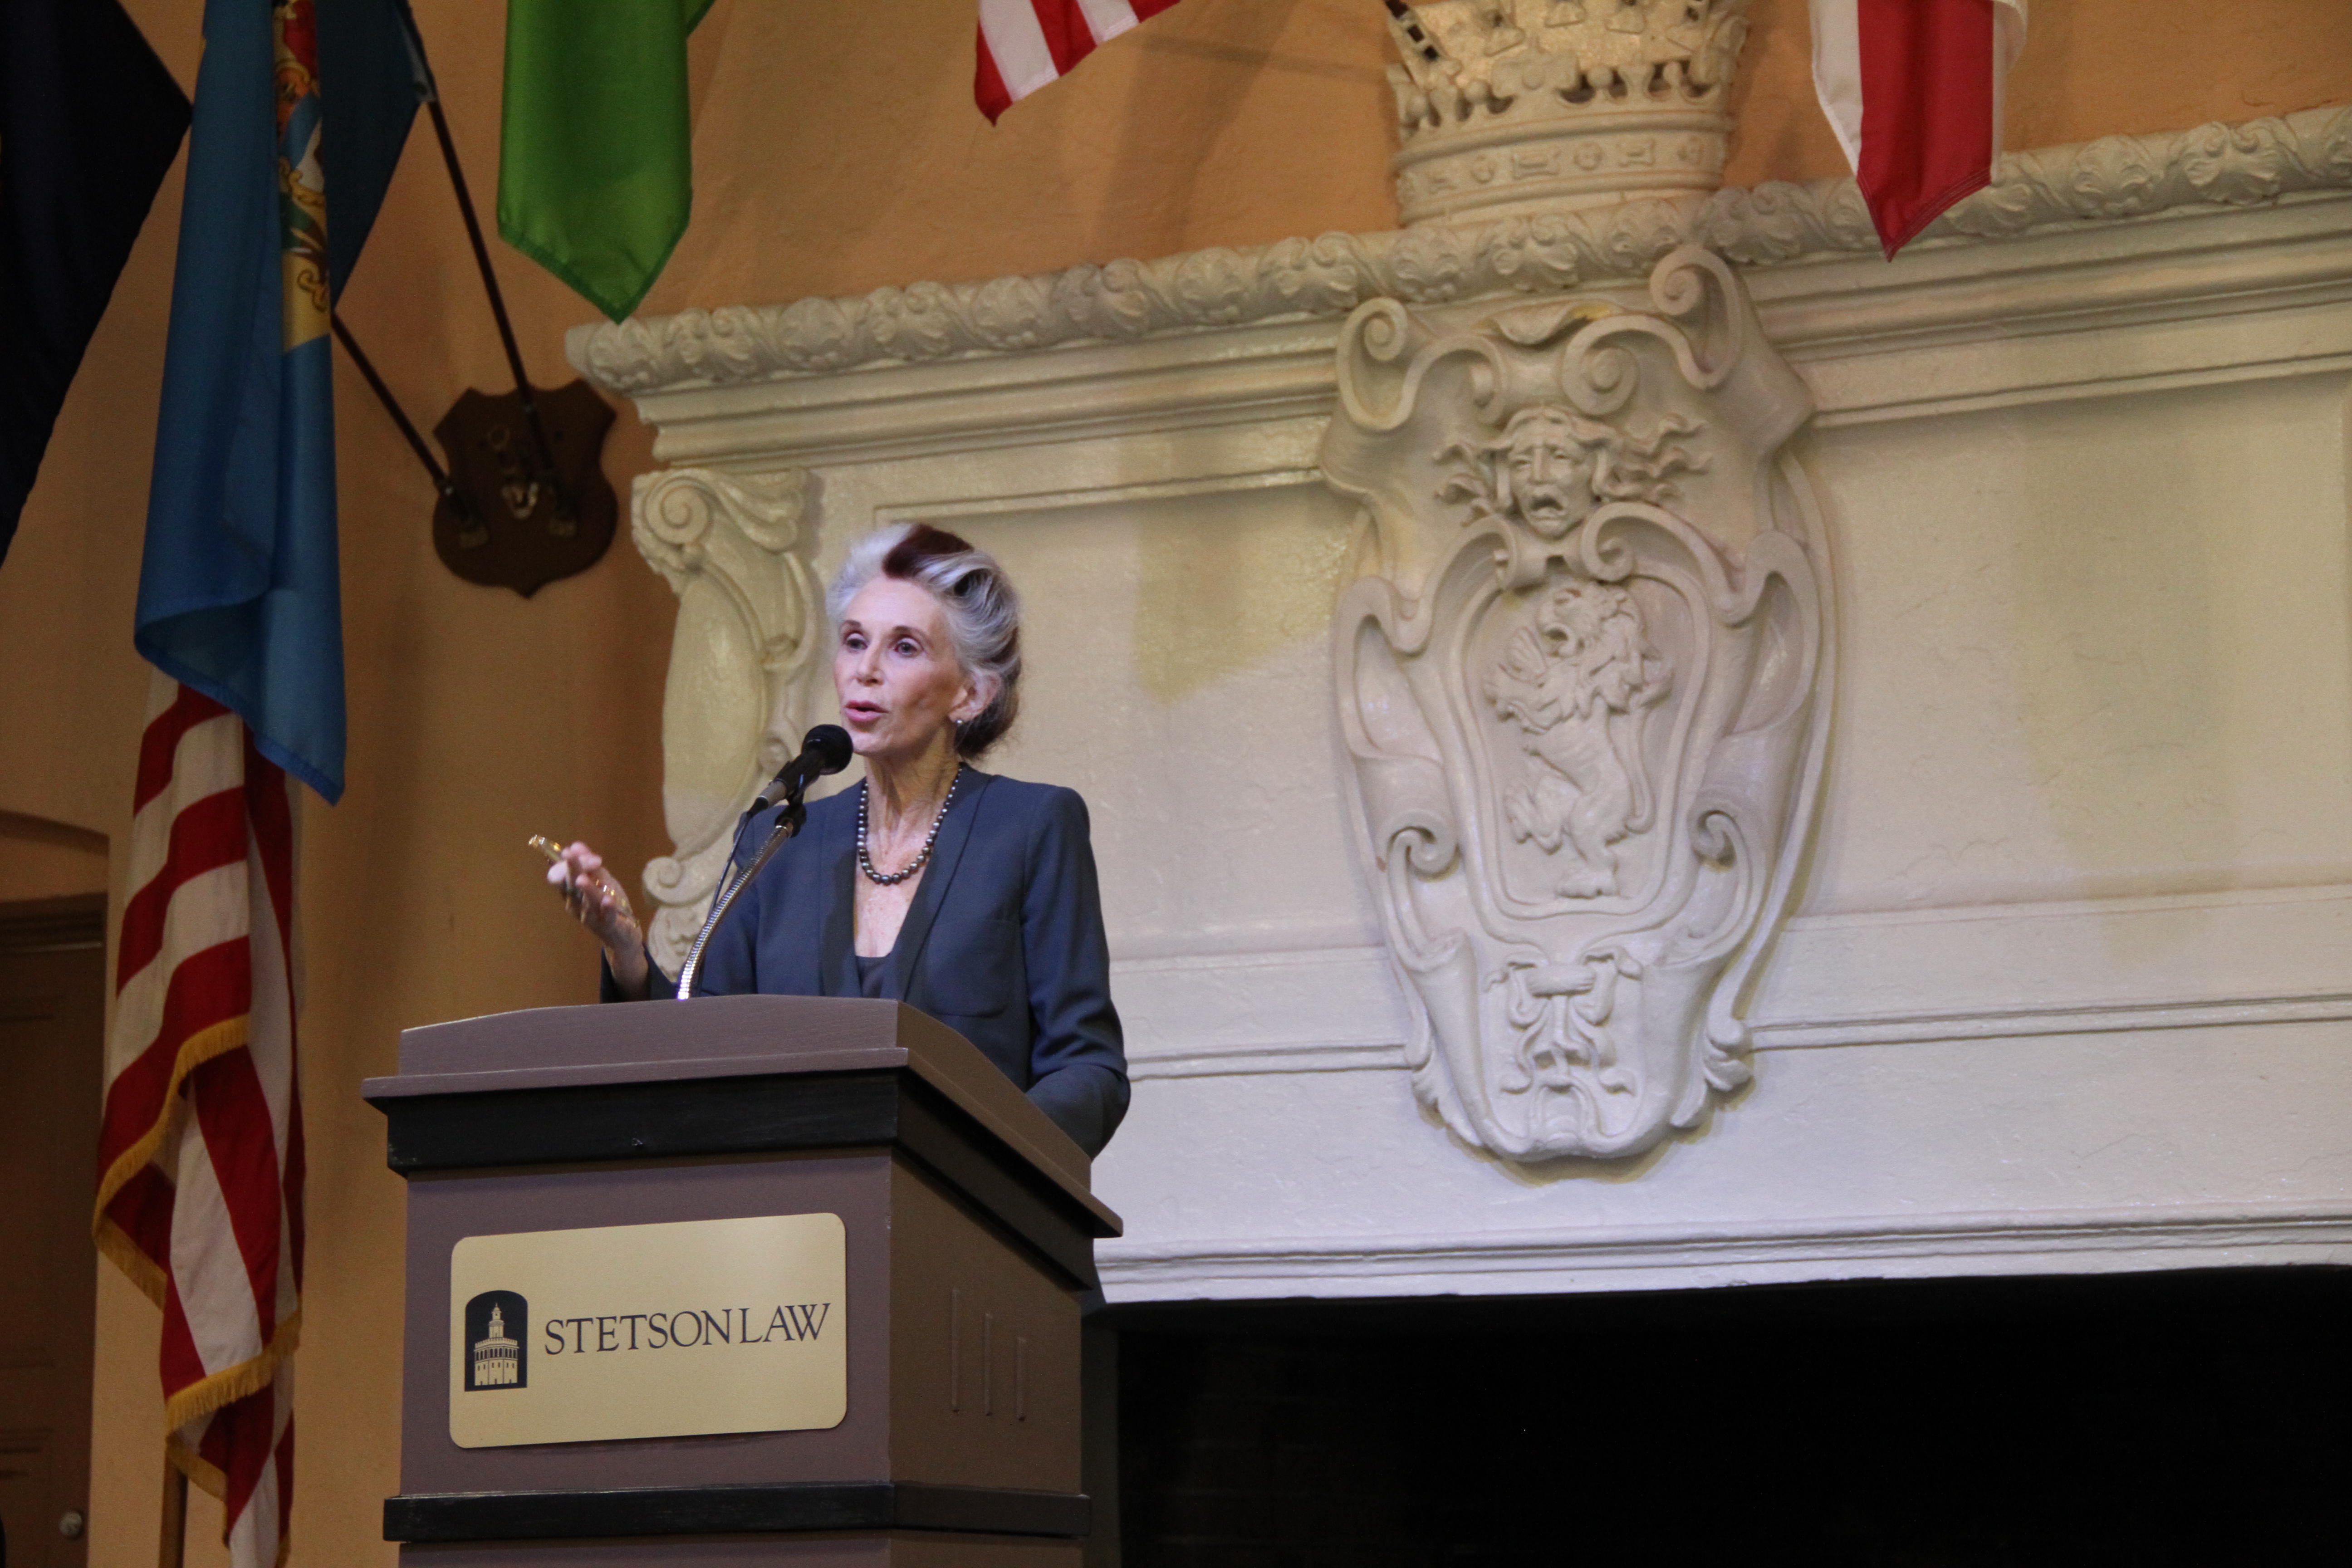 Professor Catharine MacKinnon spoke to a packed Great Hall at Stetson Law in Gulfport on Oct. 19. Photo by Merve Ozcan.